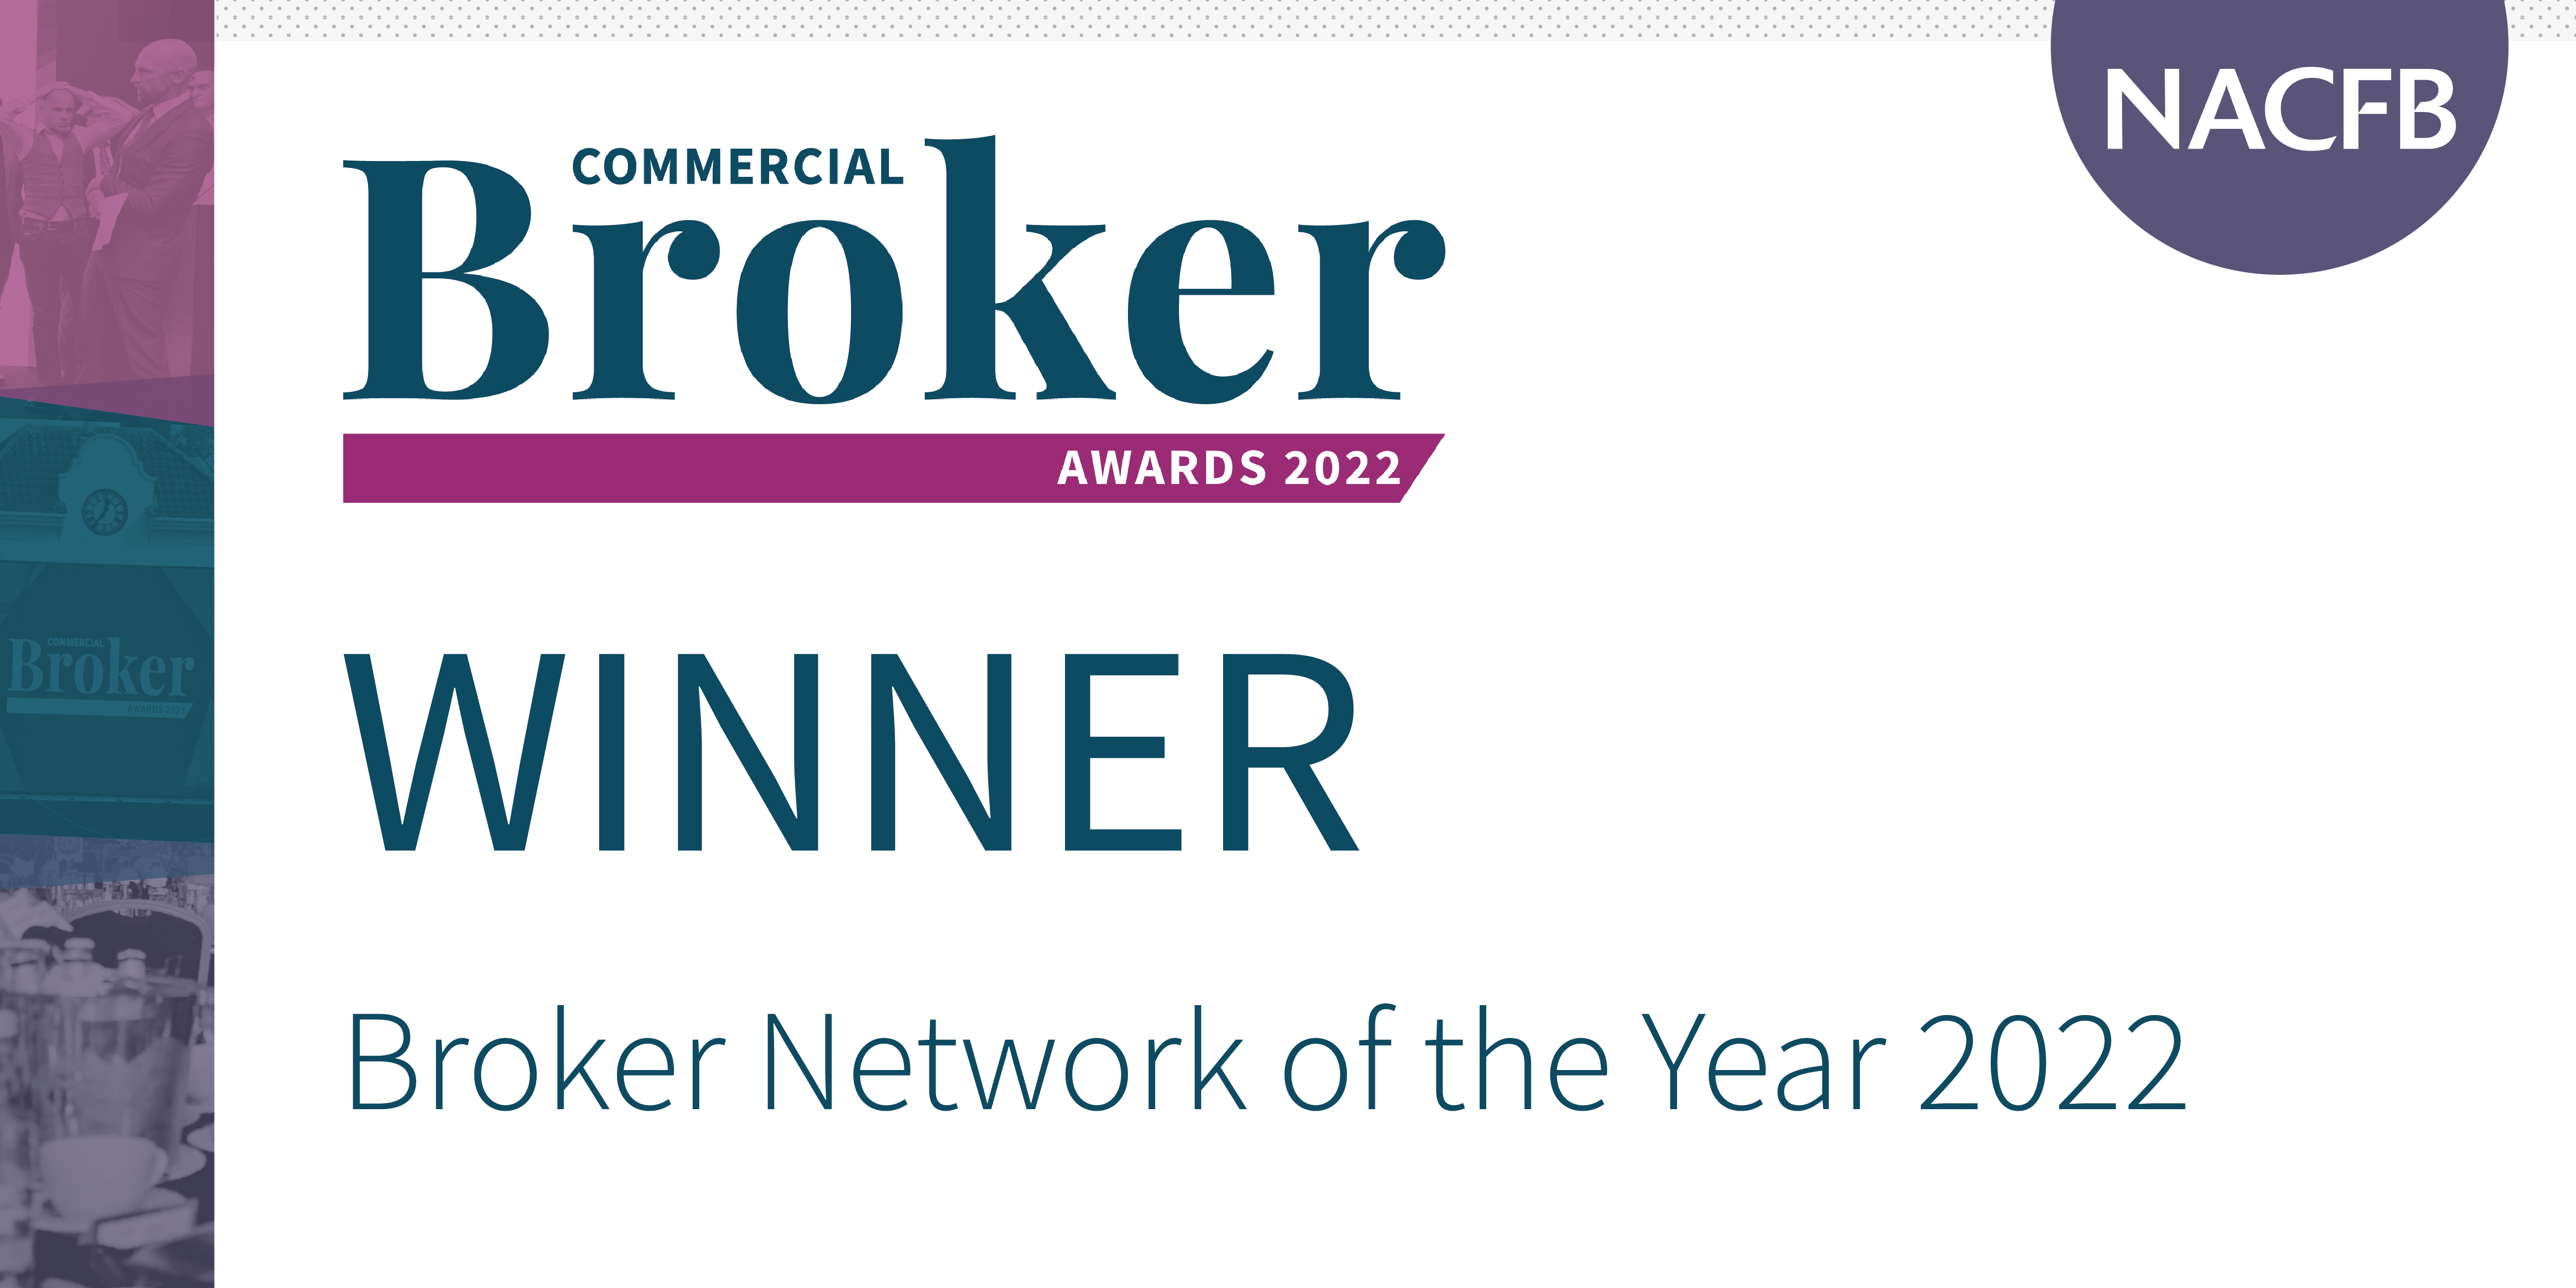 Broker Network of the Year 2022